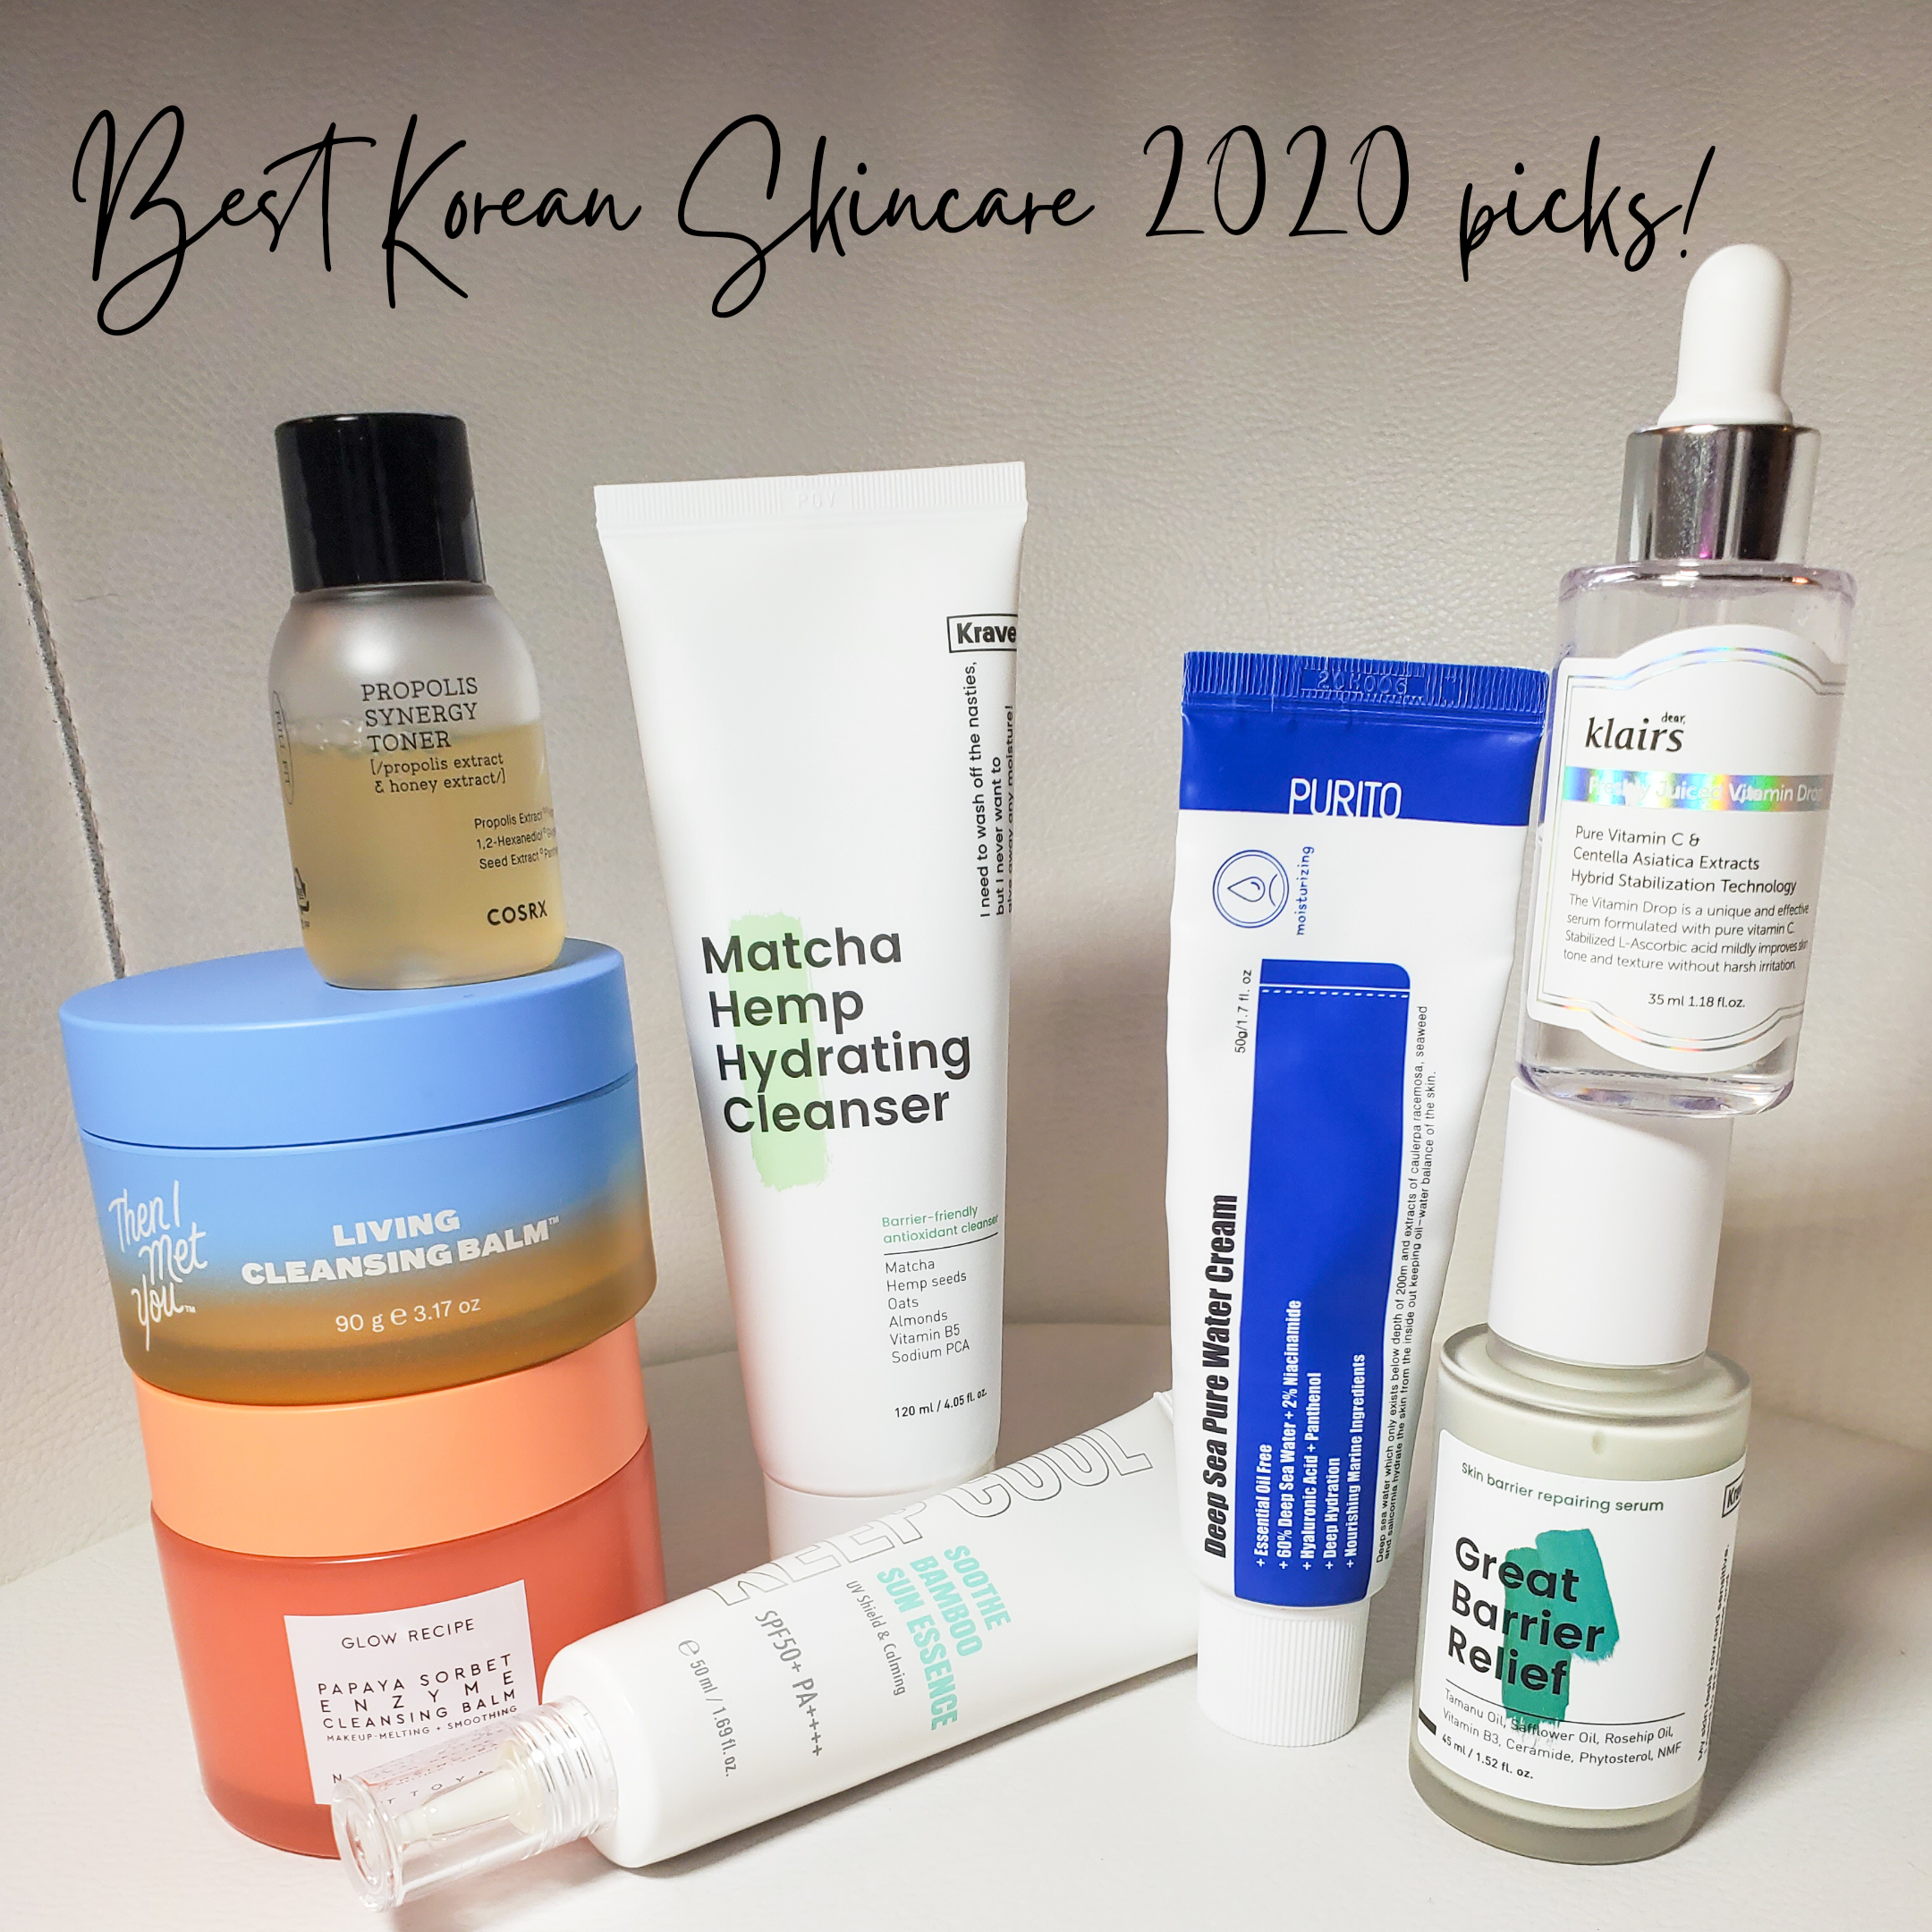 I Discovered the Best Korean Skincare Products in 2020